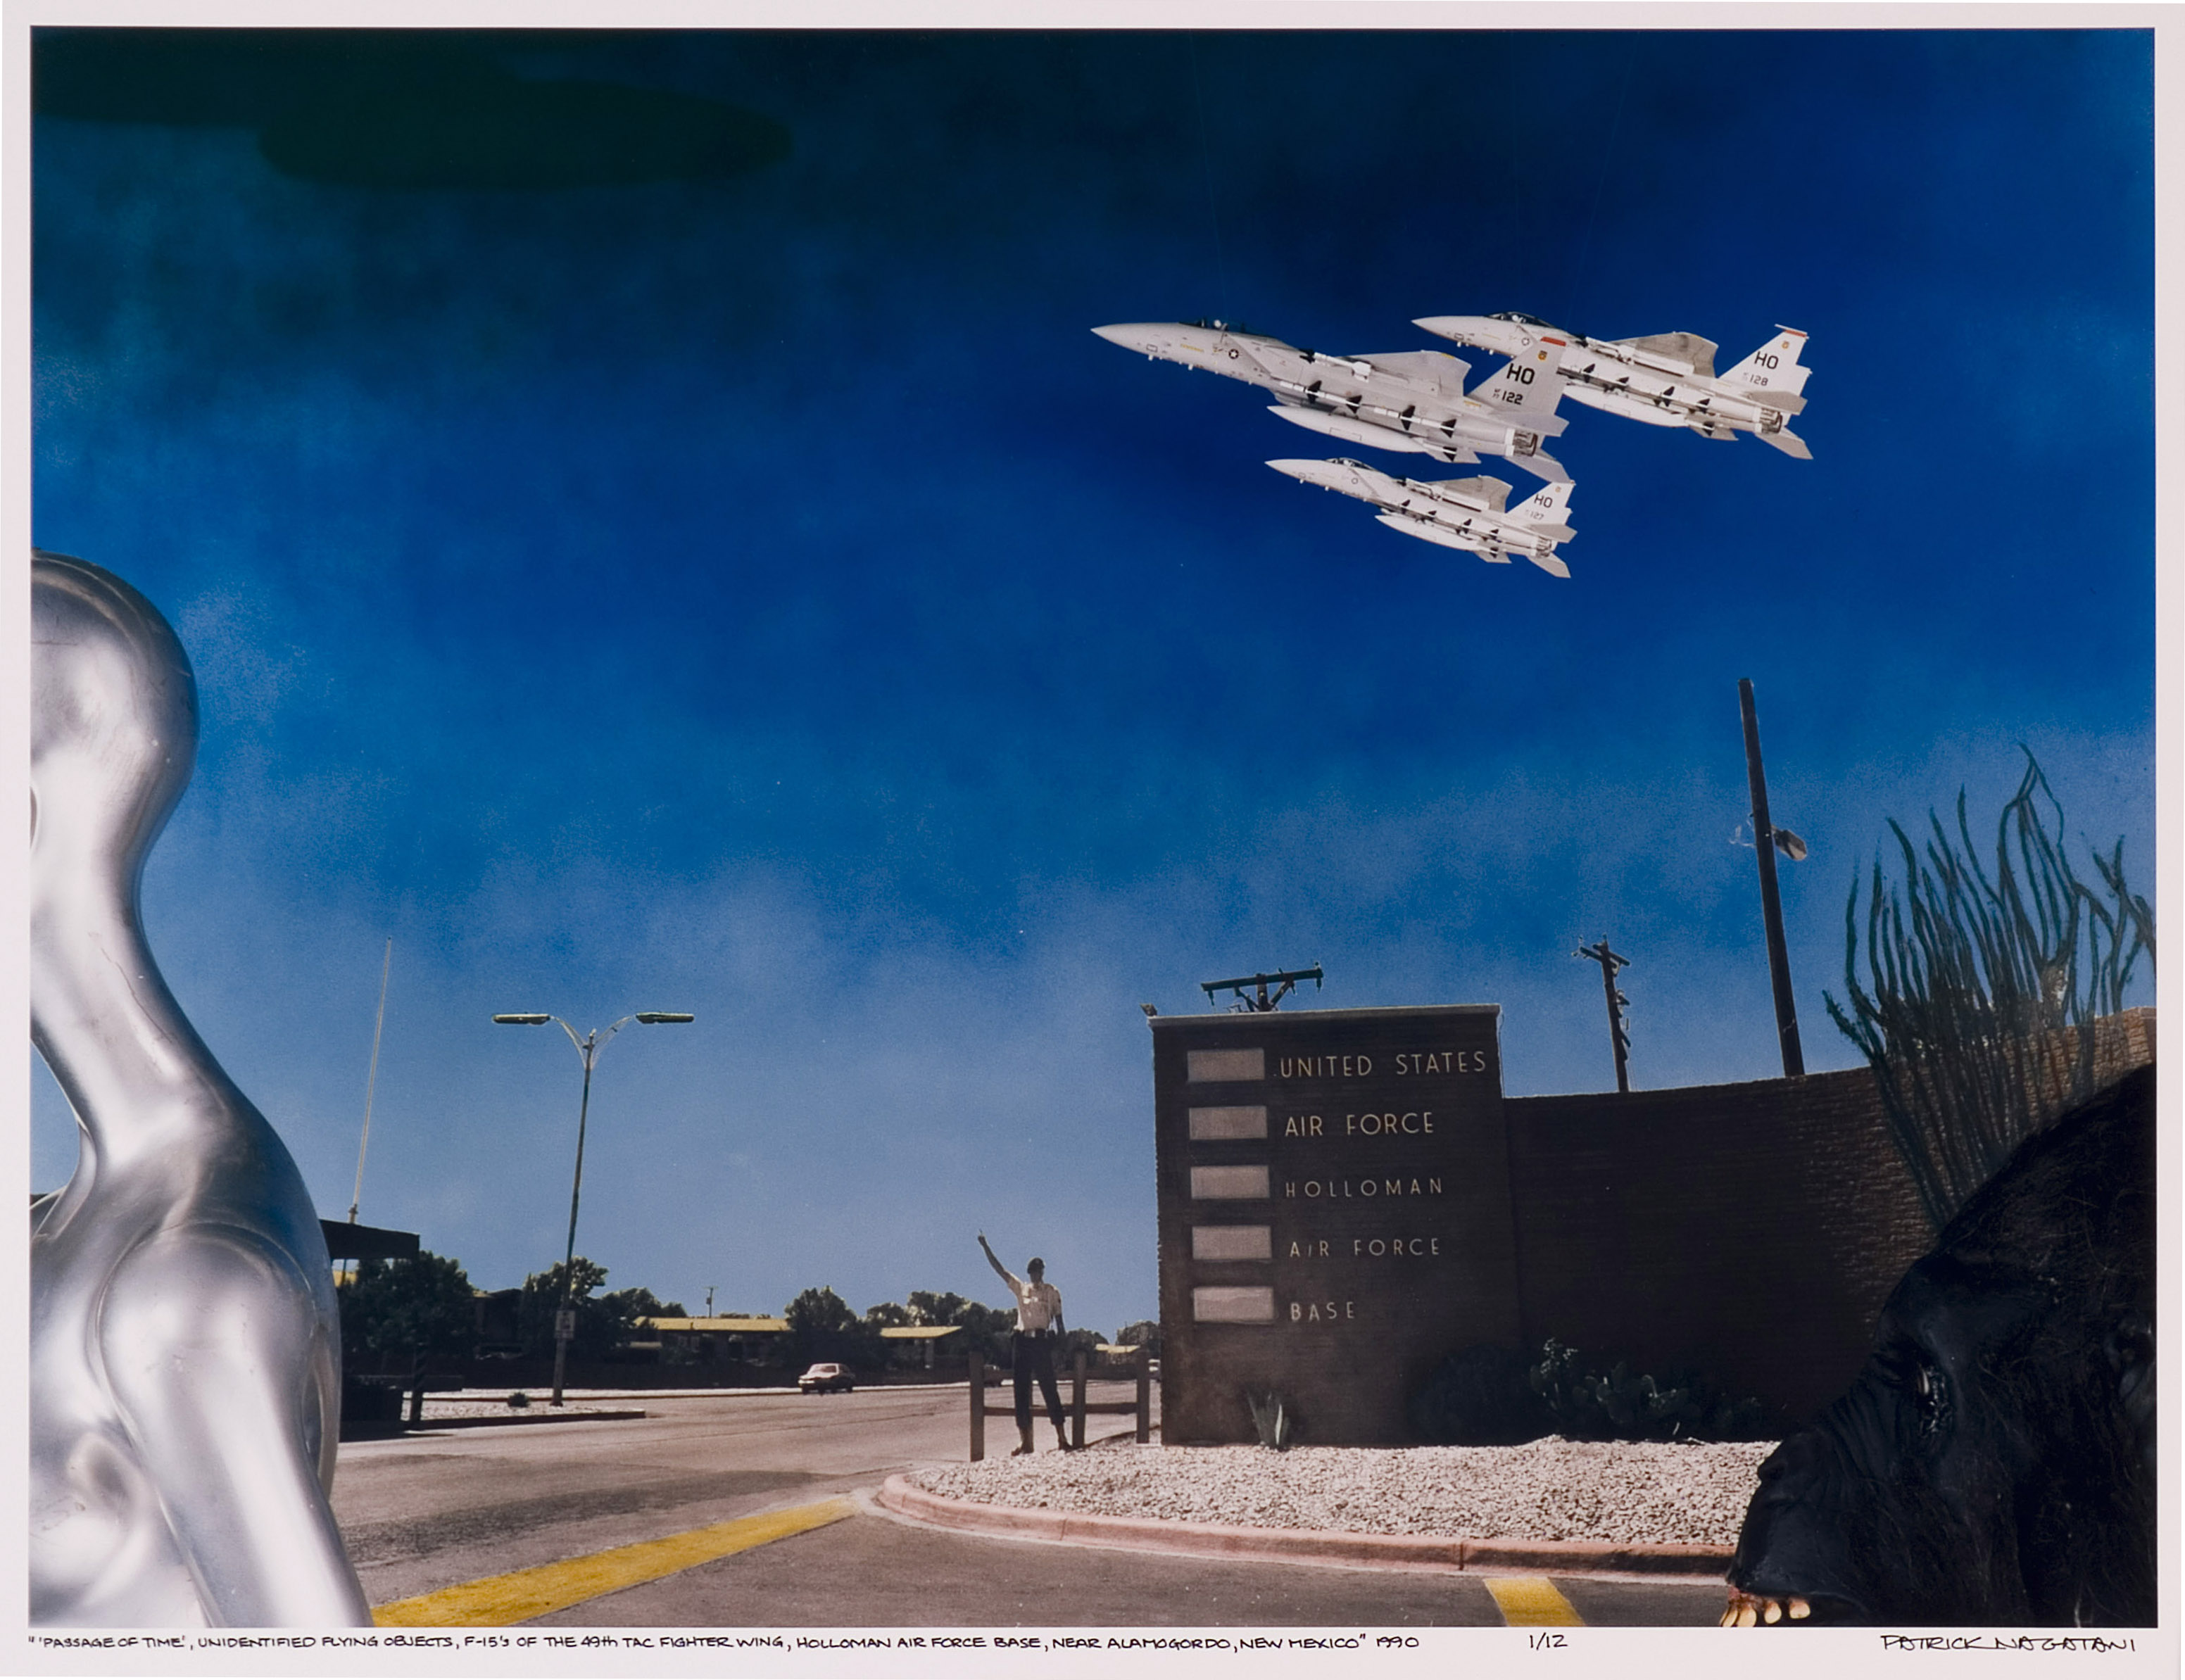 "Passage of Time," Unidentified Flying Objects, F-15’s of the 49th TAC Fighter